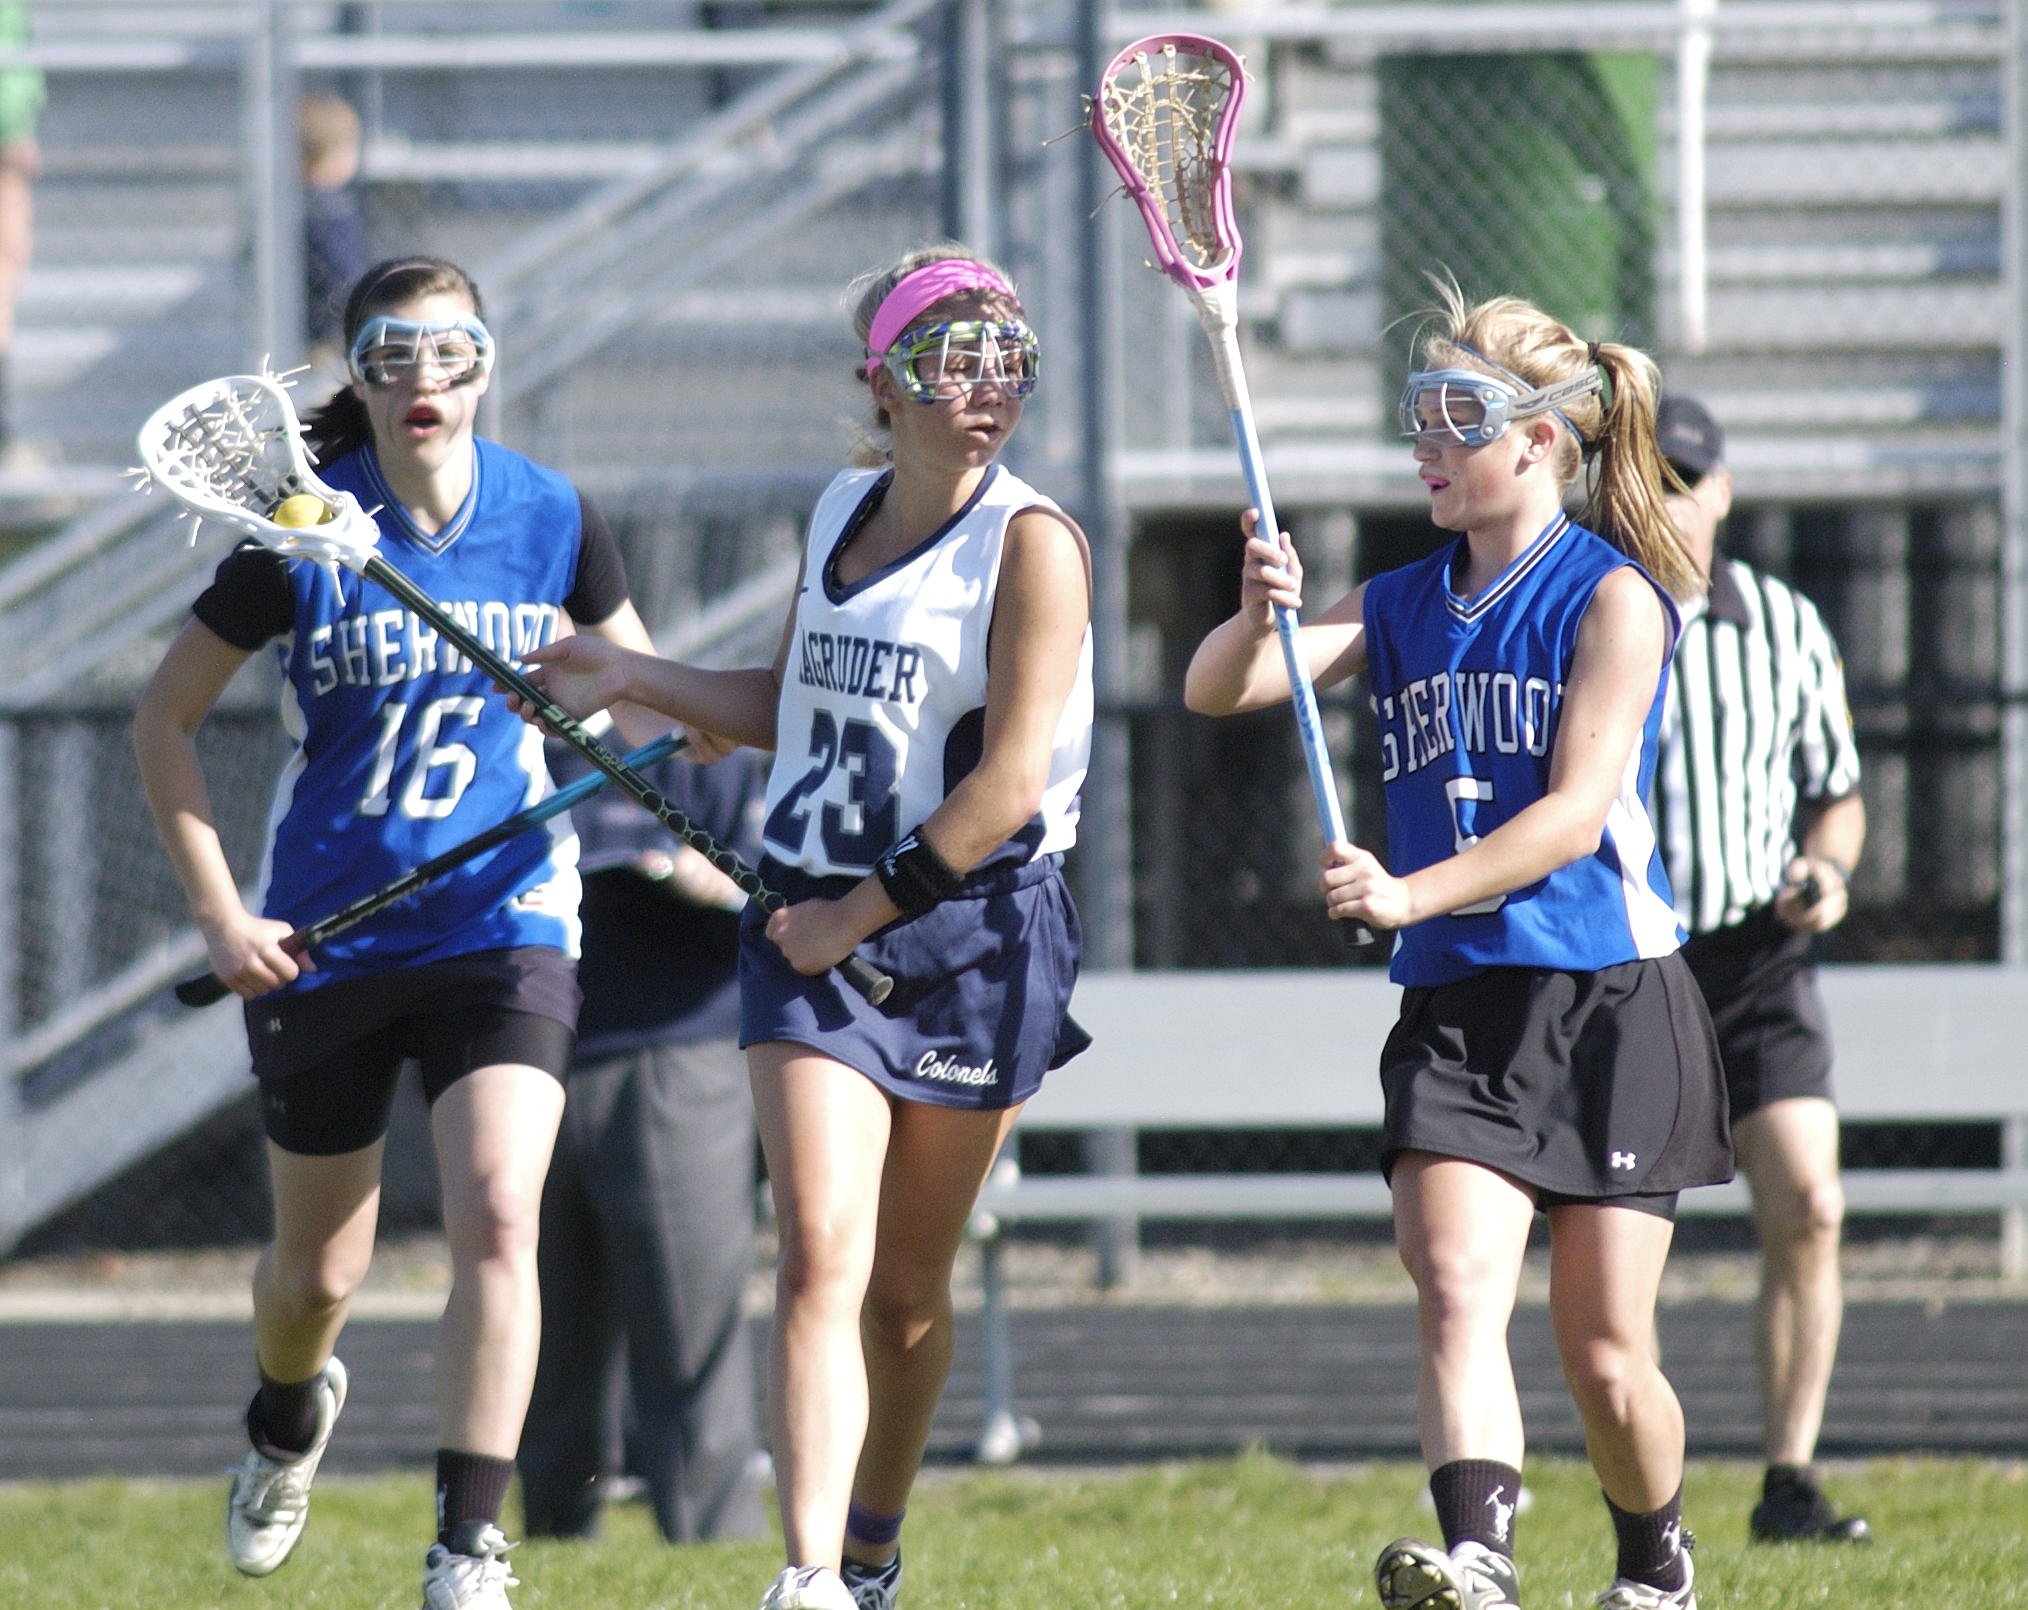 a group of girls playing a game of lacrosse